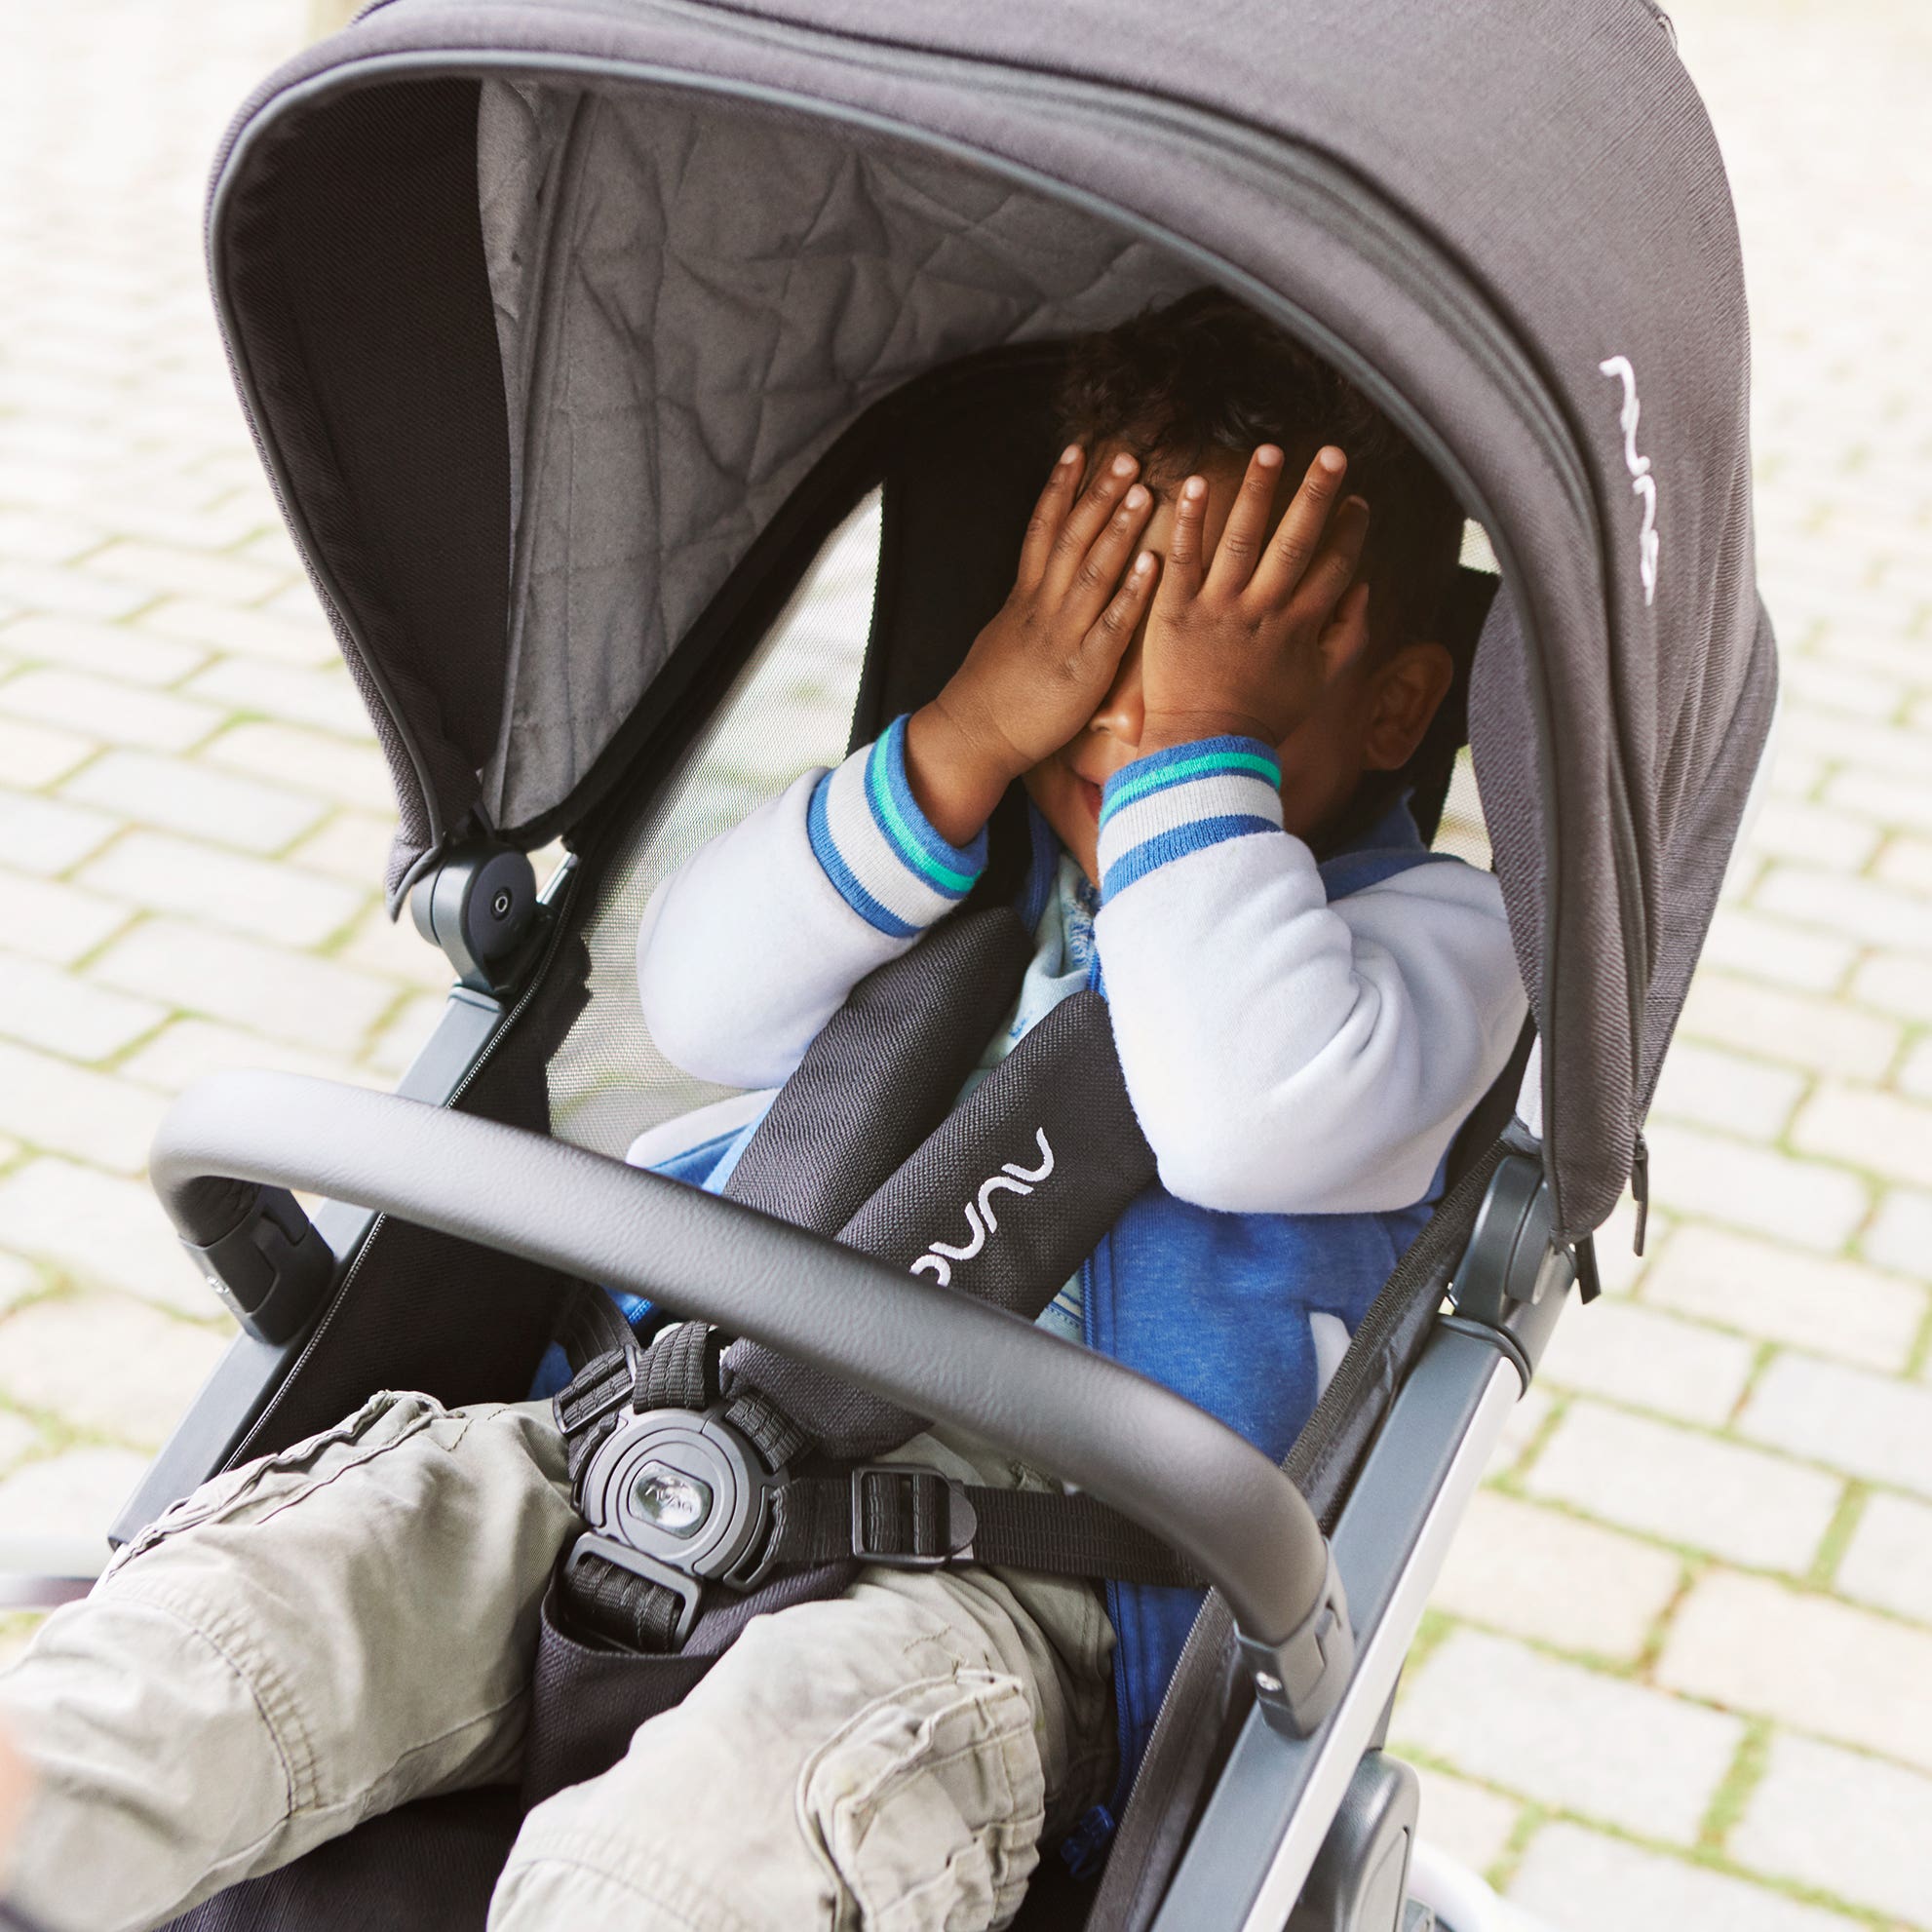 Boy in IVVI totl stroller covers his face with his hands